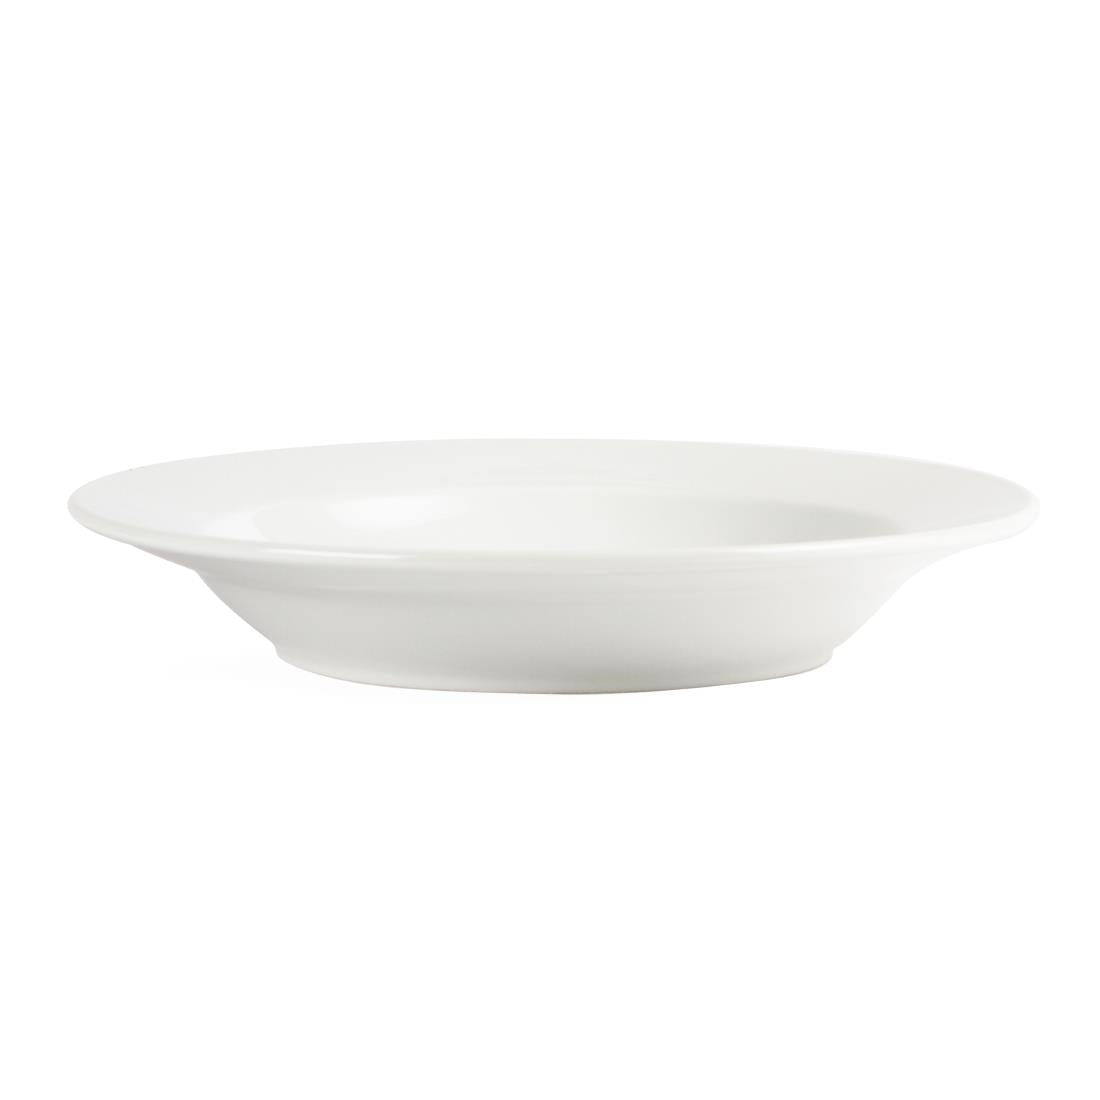 C363 Olympia Whiteware Deep Plates 270mm 2Ltr (Pack of 6)